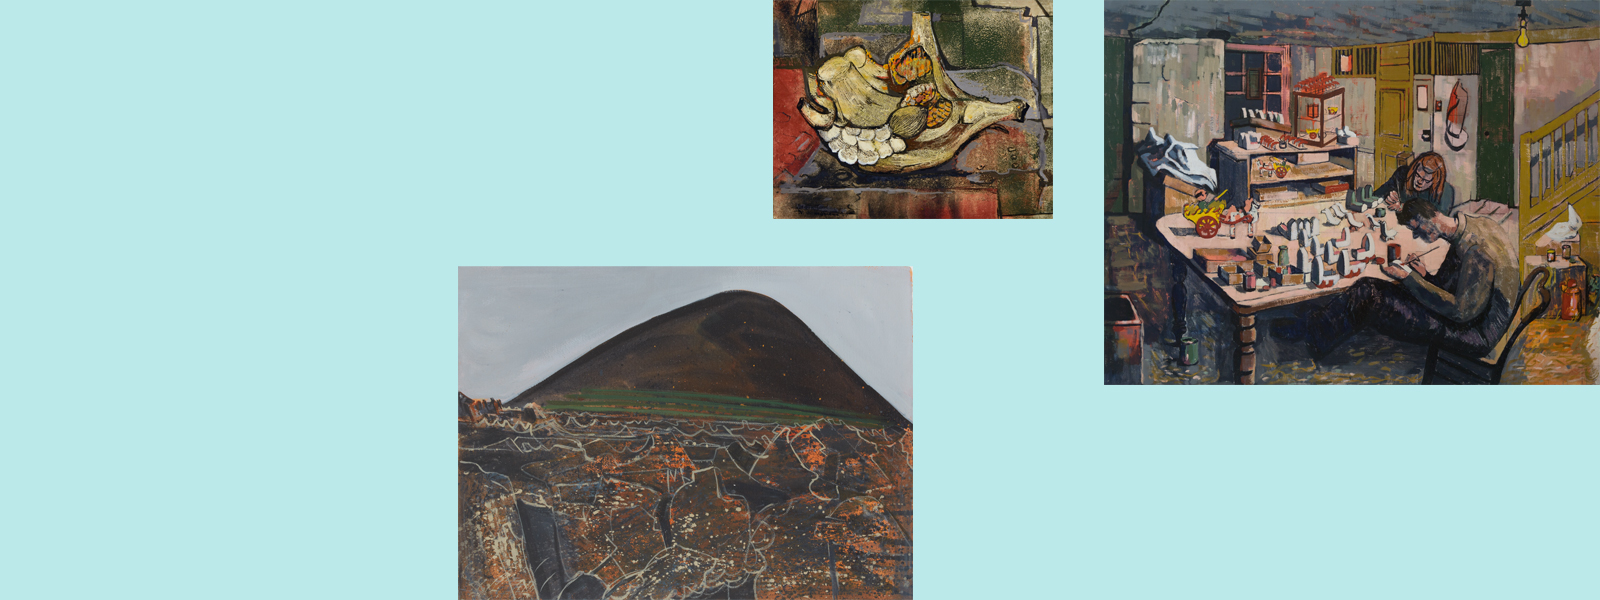 Three paintings grouped on a light blue background. From left to right: a volcano with rocky lava flow in foreground; an abstracted composition of fungi on wood in green and red background; an abstracted composition of two people working in a toy shop